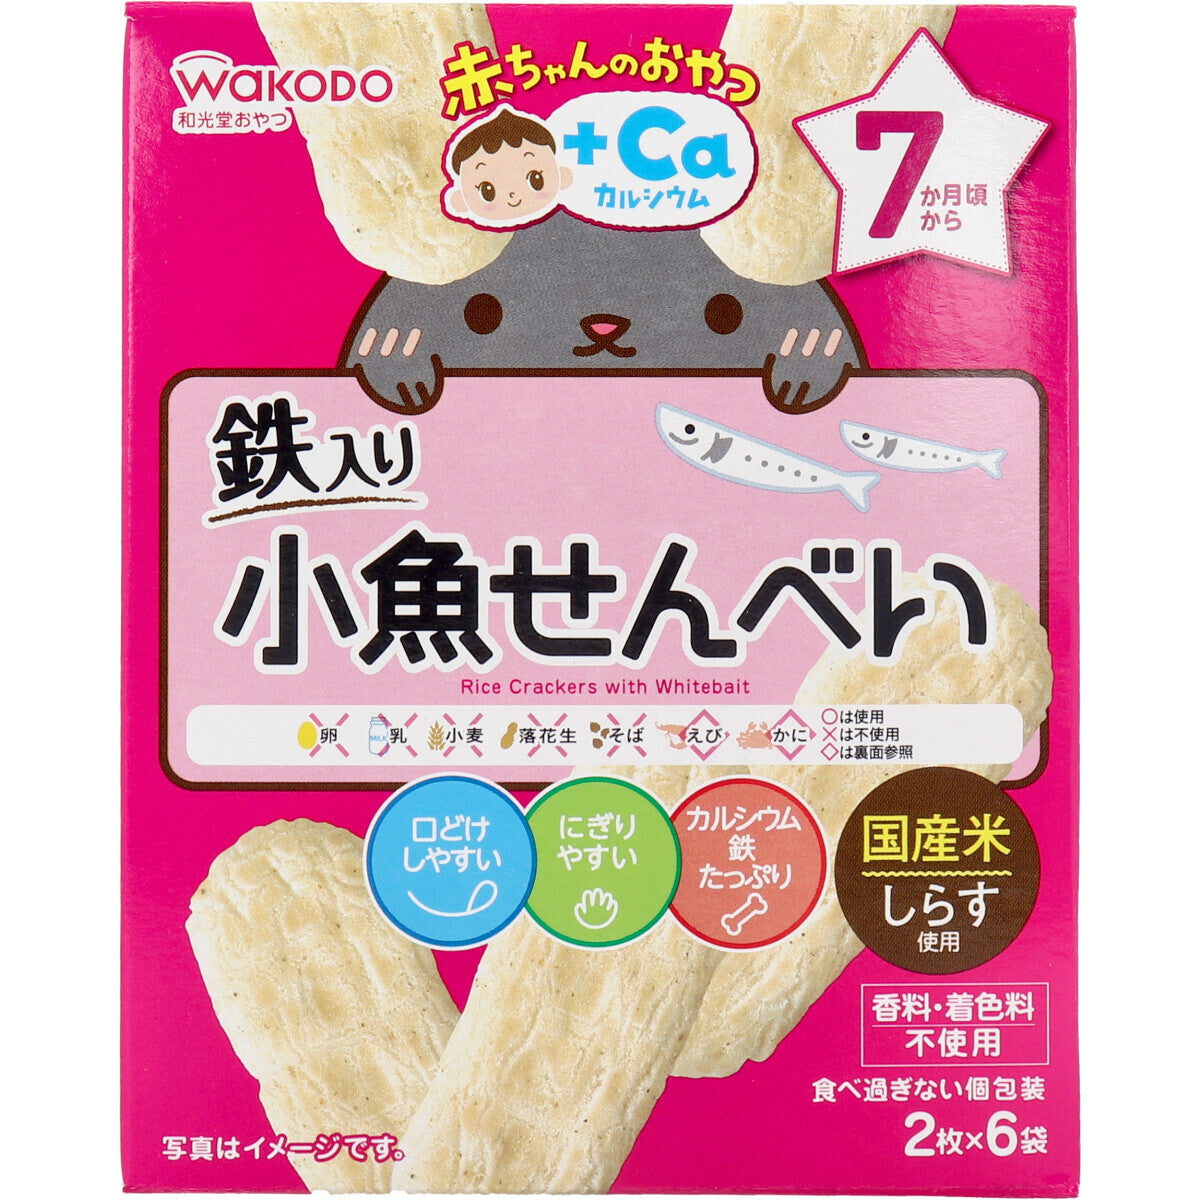 Wakodo - Baby Snacks + Ca Small Fish Crackers Teether Biscuit 2 Pieces x 6 Bags